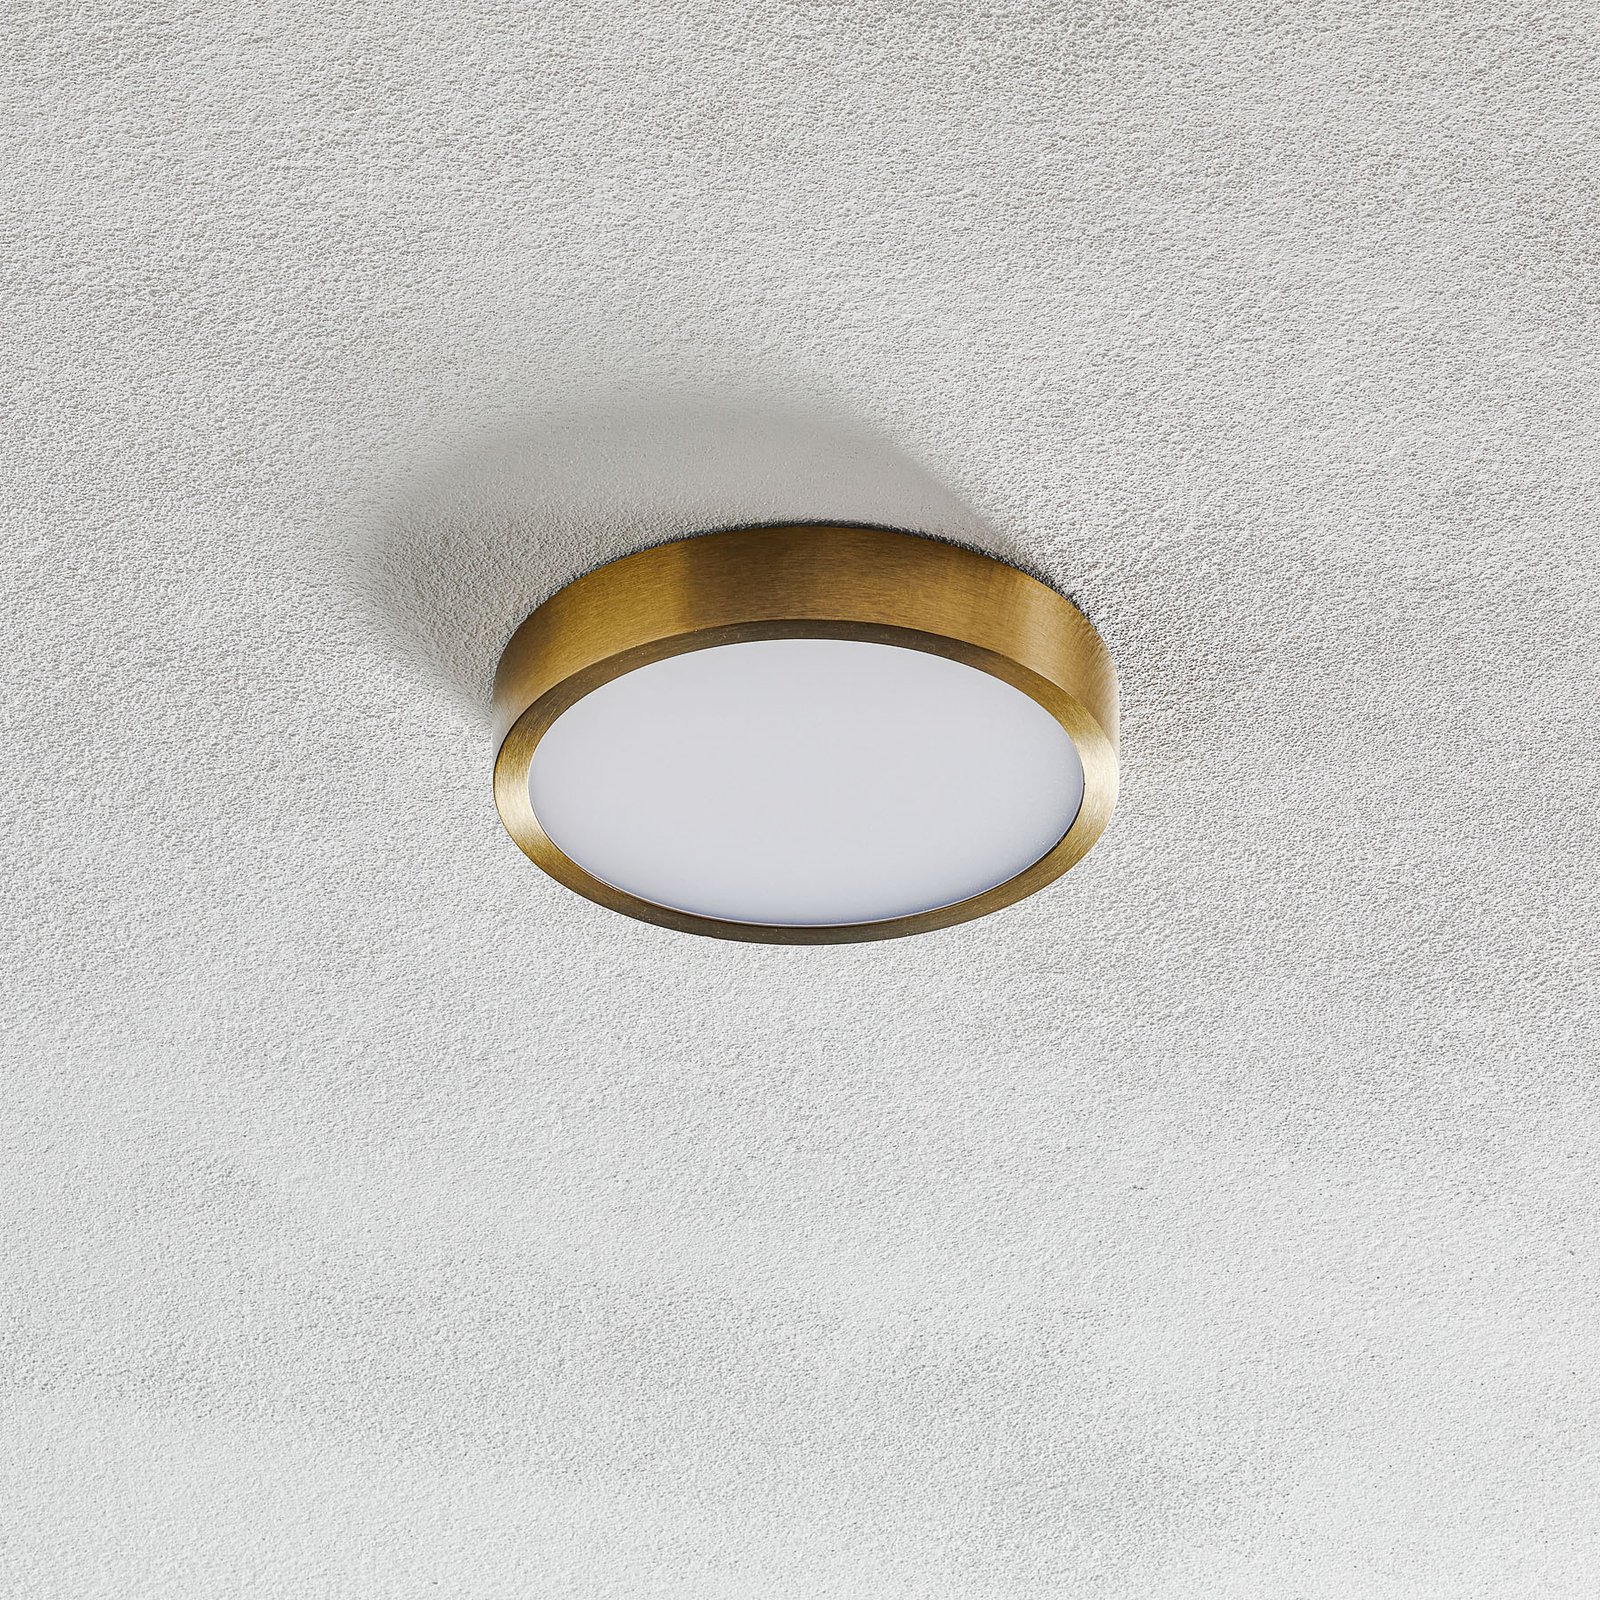 Bully LED ceiling light with a patina look, 14 cm